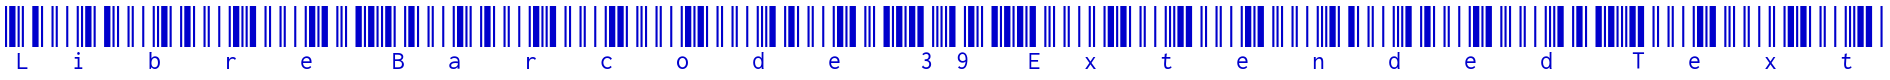 Libre Barcode 39 Extended Text الخط